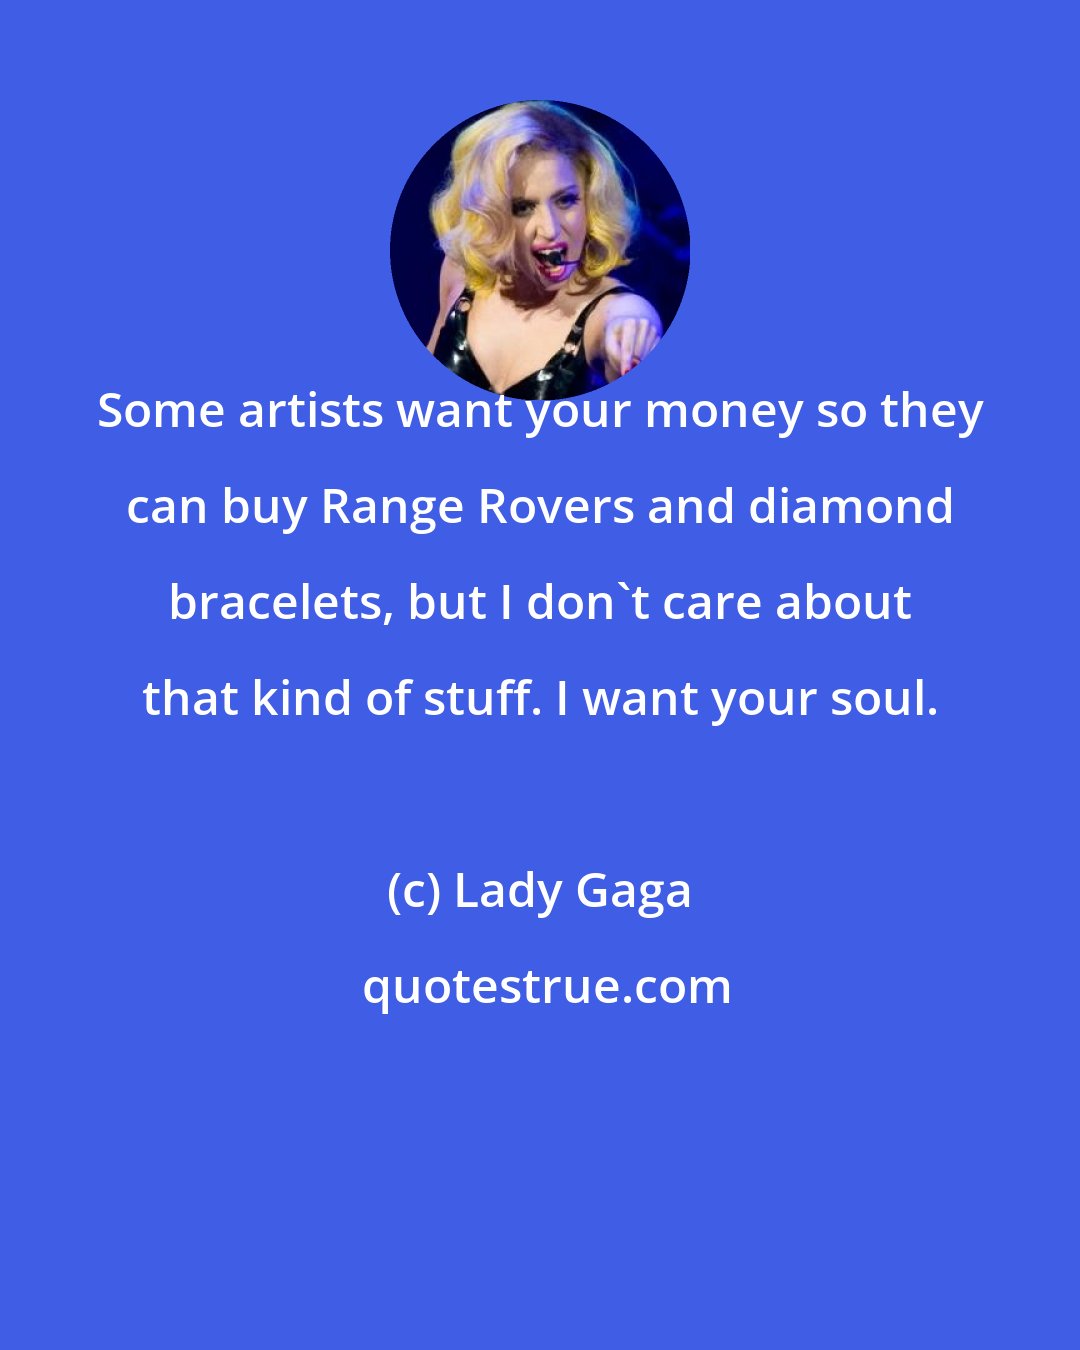 Lady Gaga: Some artists want your money so they can buy Range Rovers and diamond bracelets, but I don't care about that kind of stuff. I want your soul.